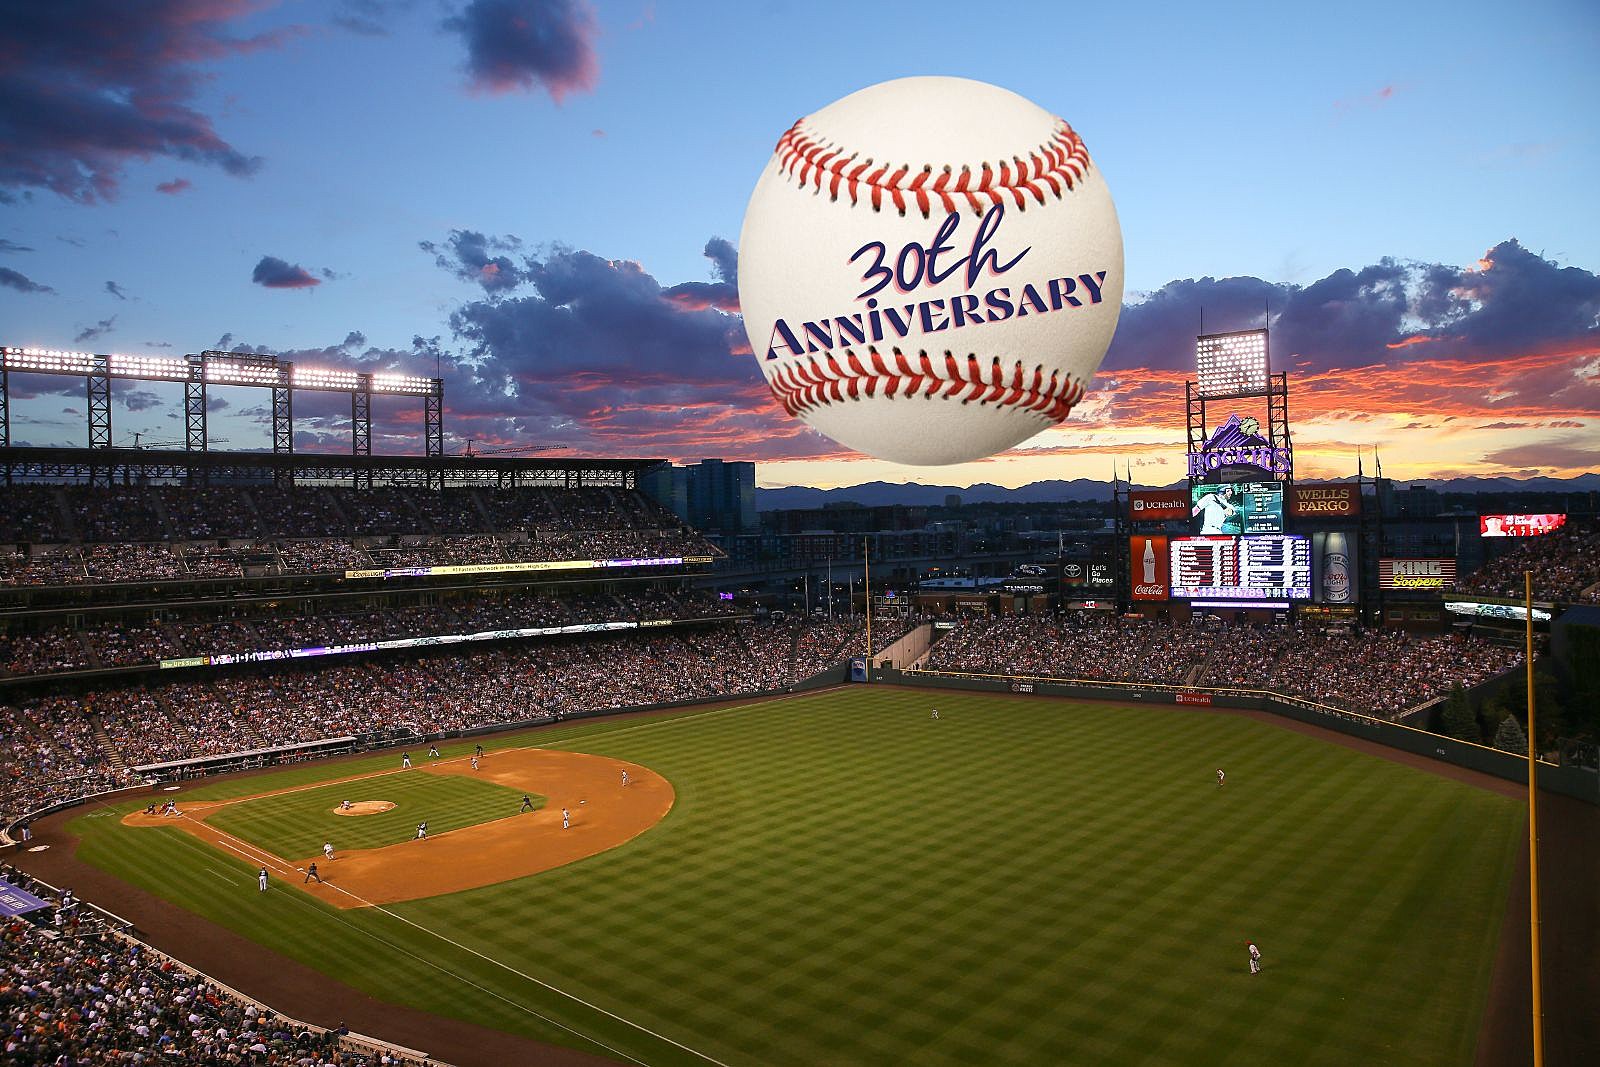 Coors Field - Home of the Colorado Rockies